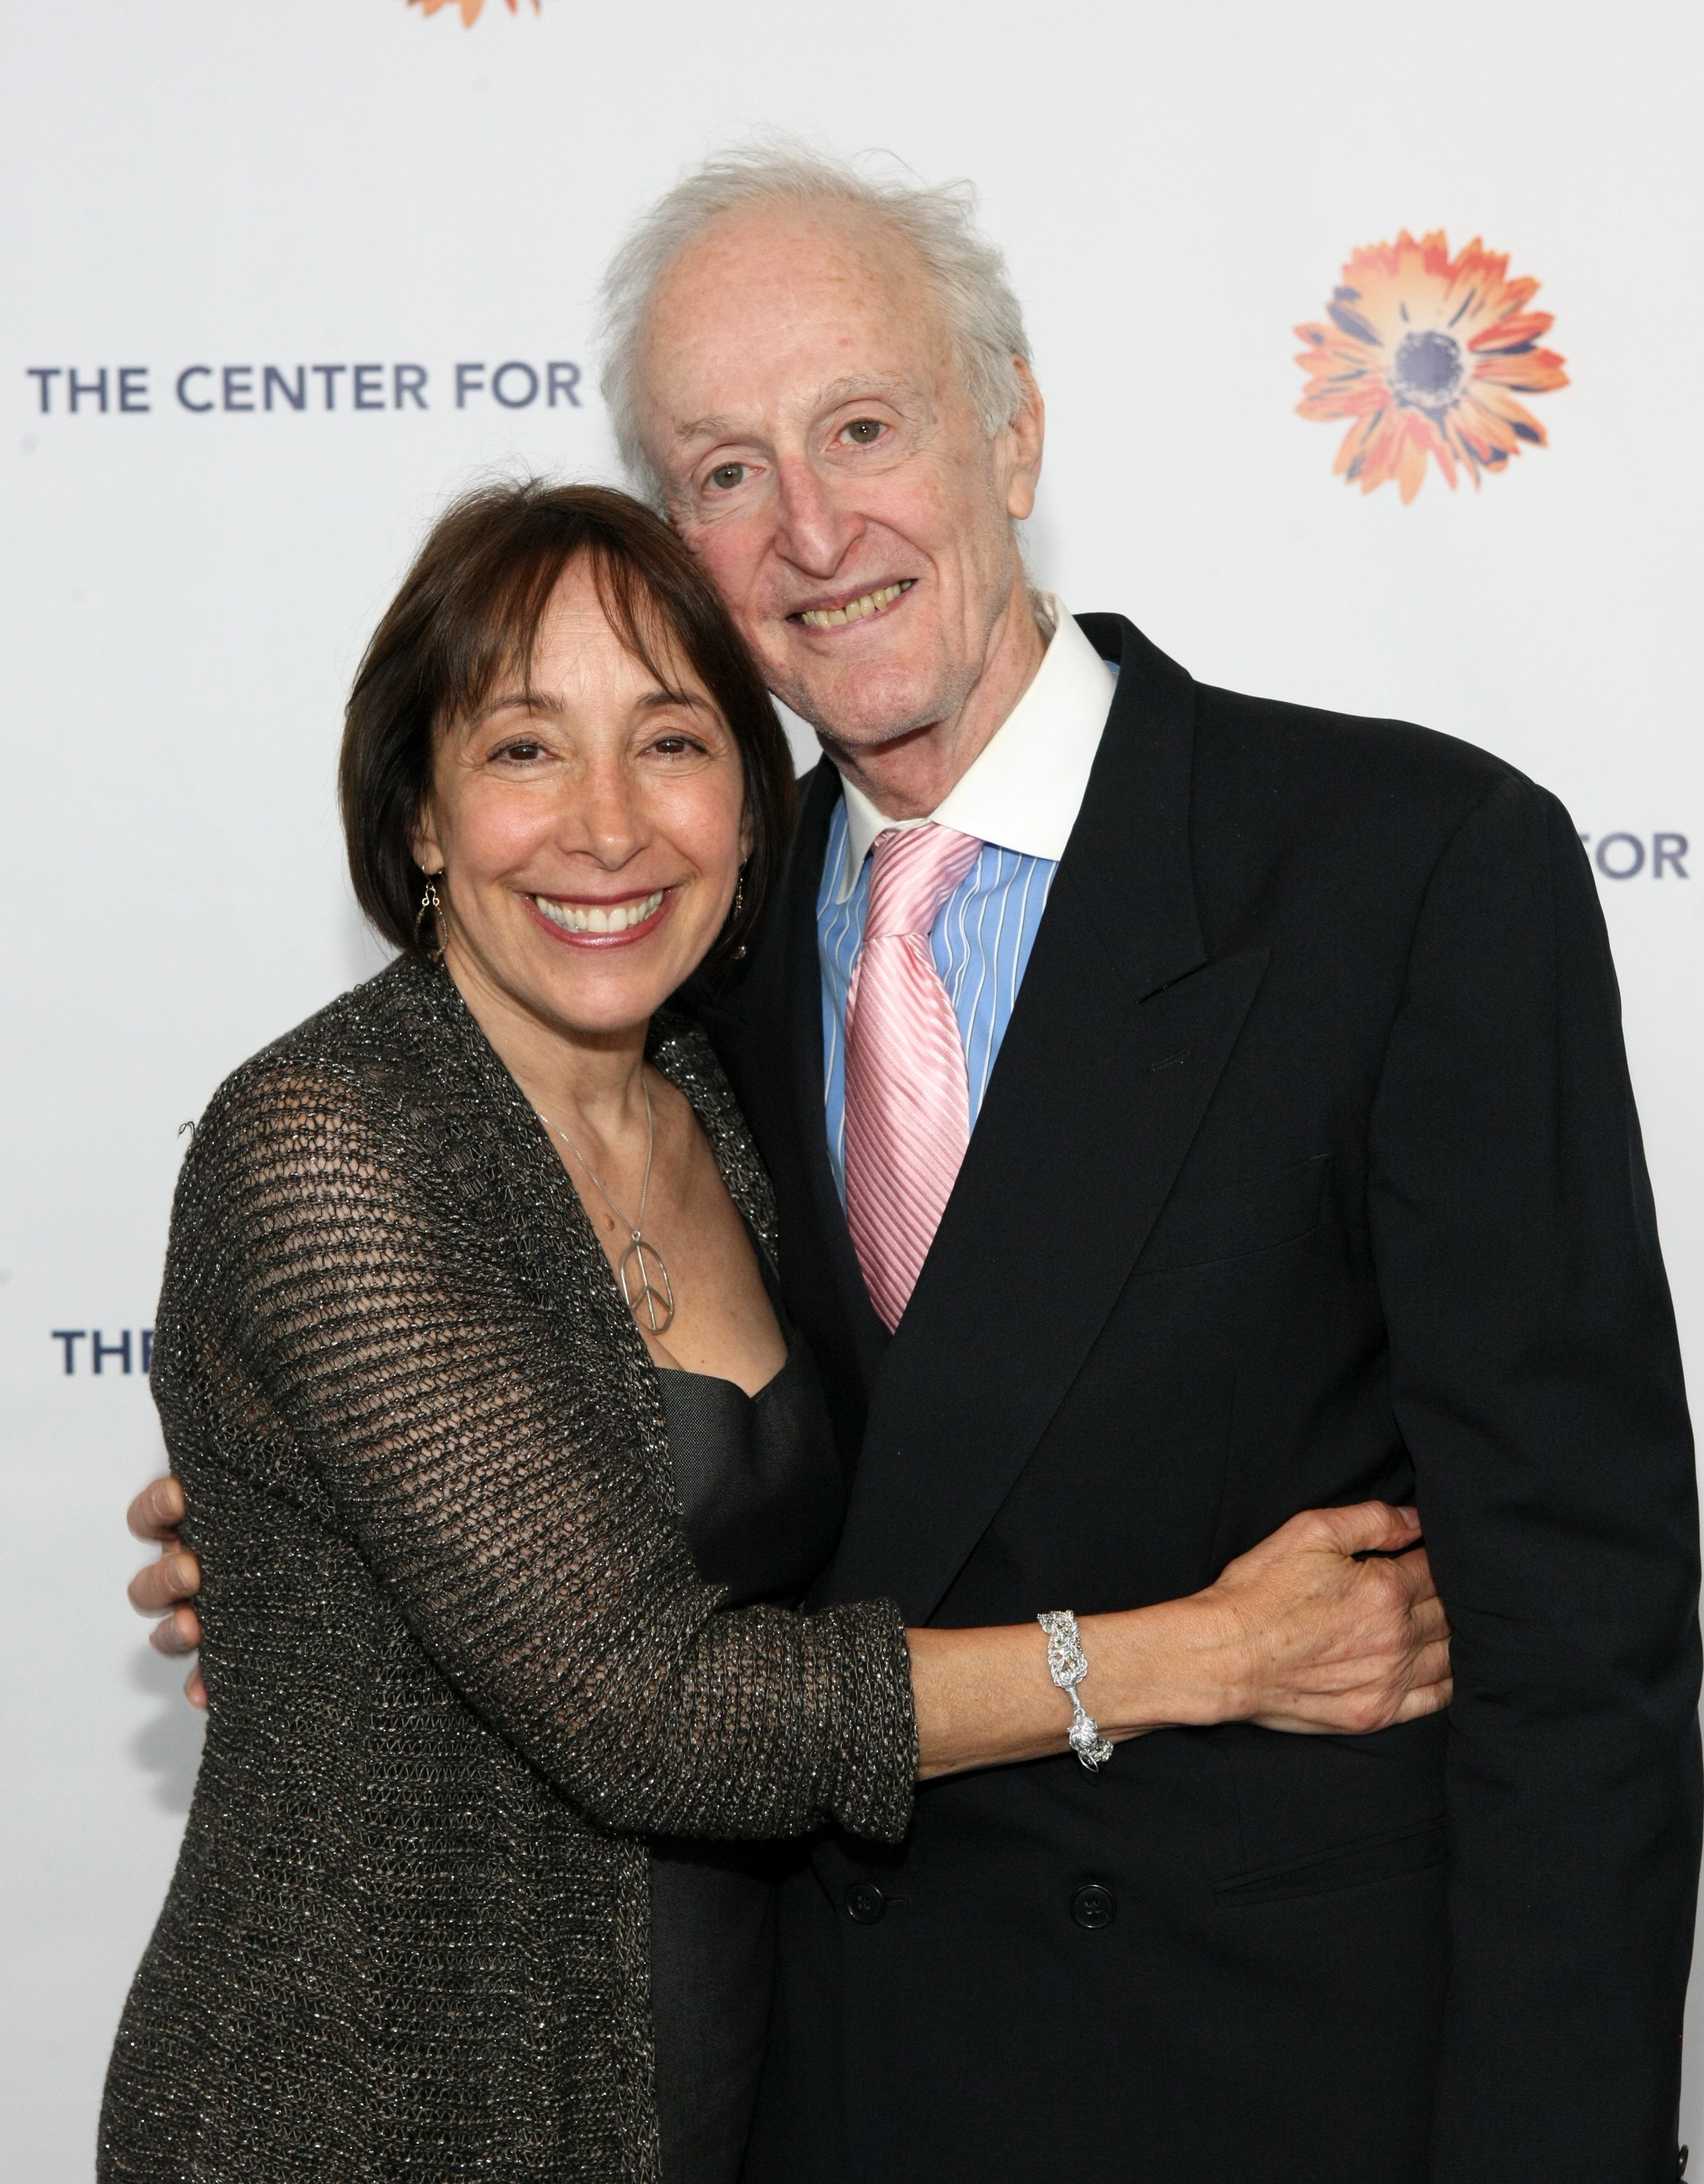 Didi Conn and her husband David Shire attend the "Evening Of Discovery" Gala at Pier Sixty at Chelsea Piers on May 15, 2012 in New York City. | Source: Getty Images